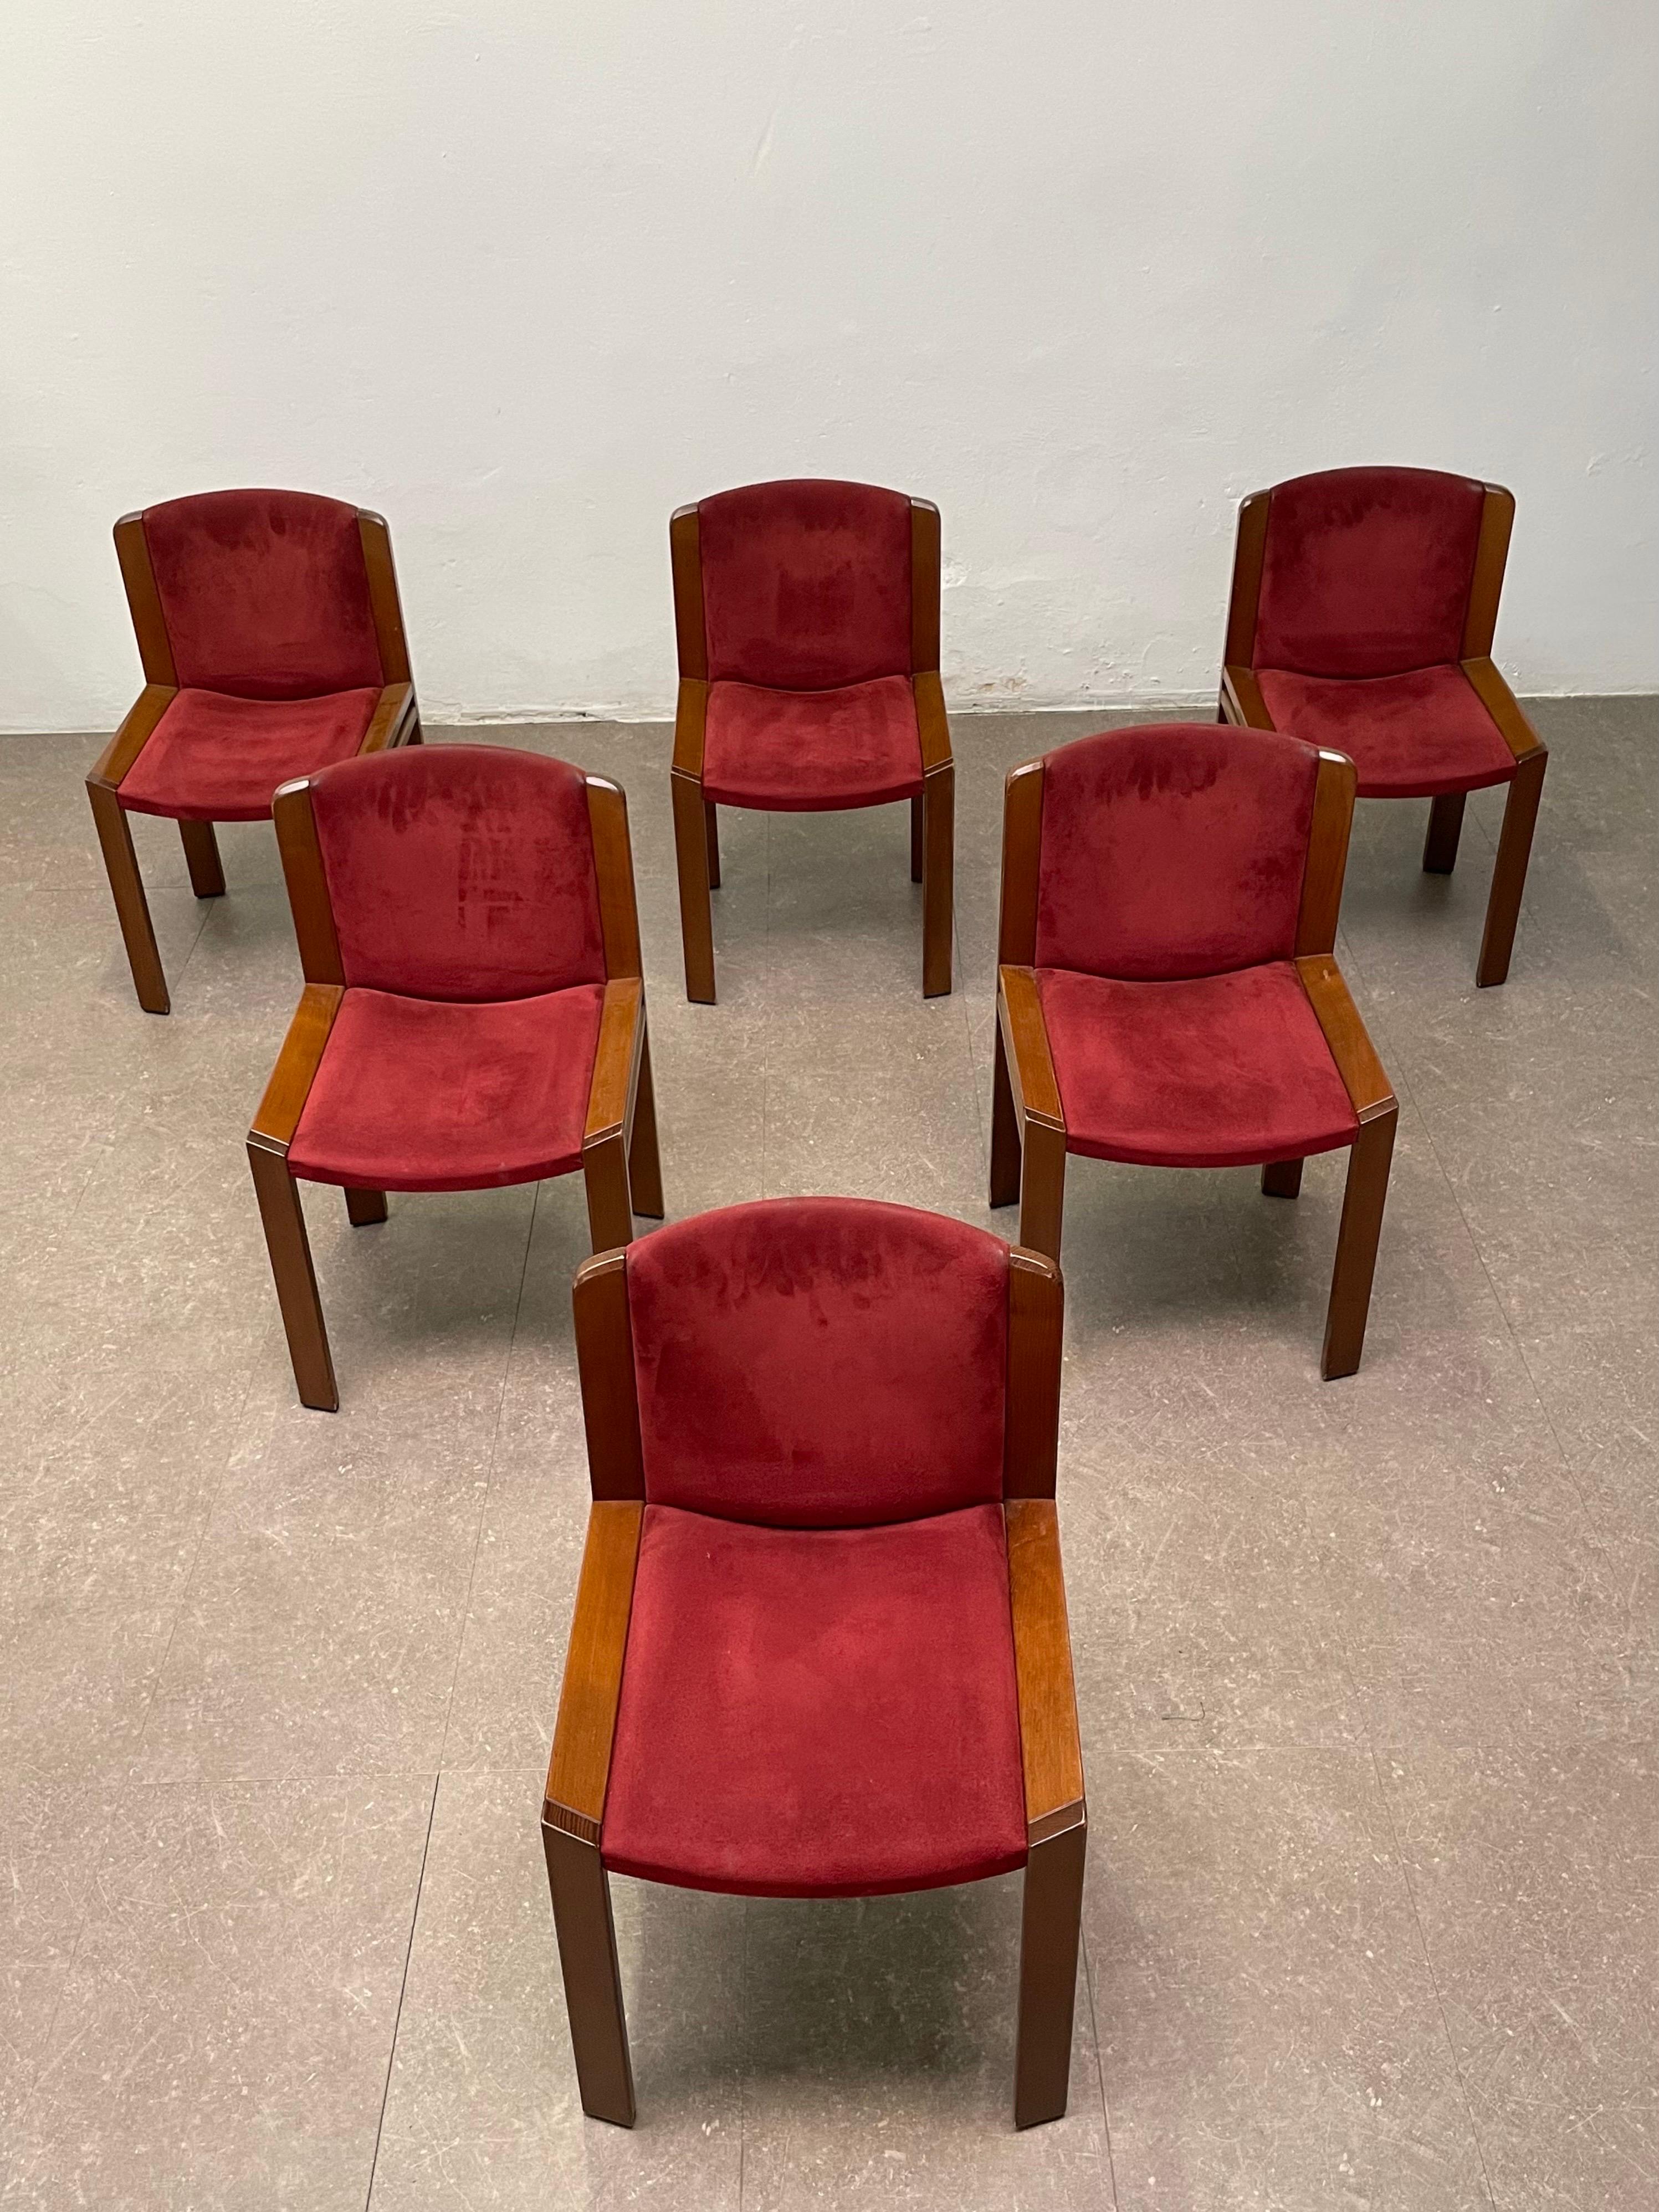 Joe Colombo for Pozzi, set of 6 dining chairs model '300', red suede and oak, Italy, 1960s.

Functionalist set of dining chairs is designed by Joe Colombo in 1966. His fascination with functionality meant he always focused on the user, which lead